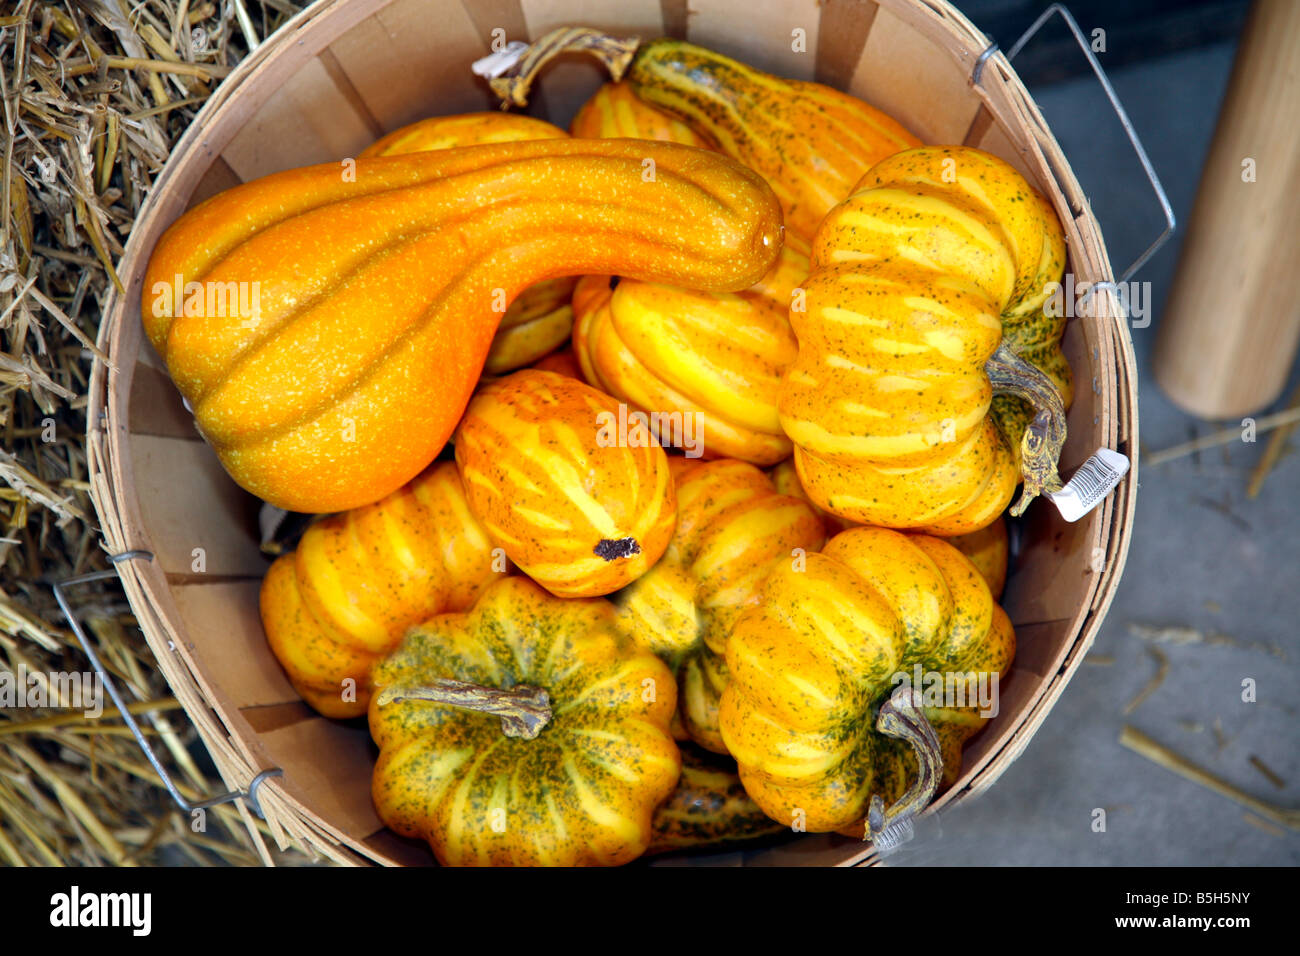 Decor items pumpkin and Flowers; for the Celebration of Thanksgiving in North America Stock Photo